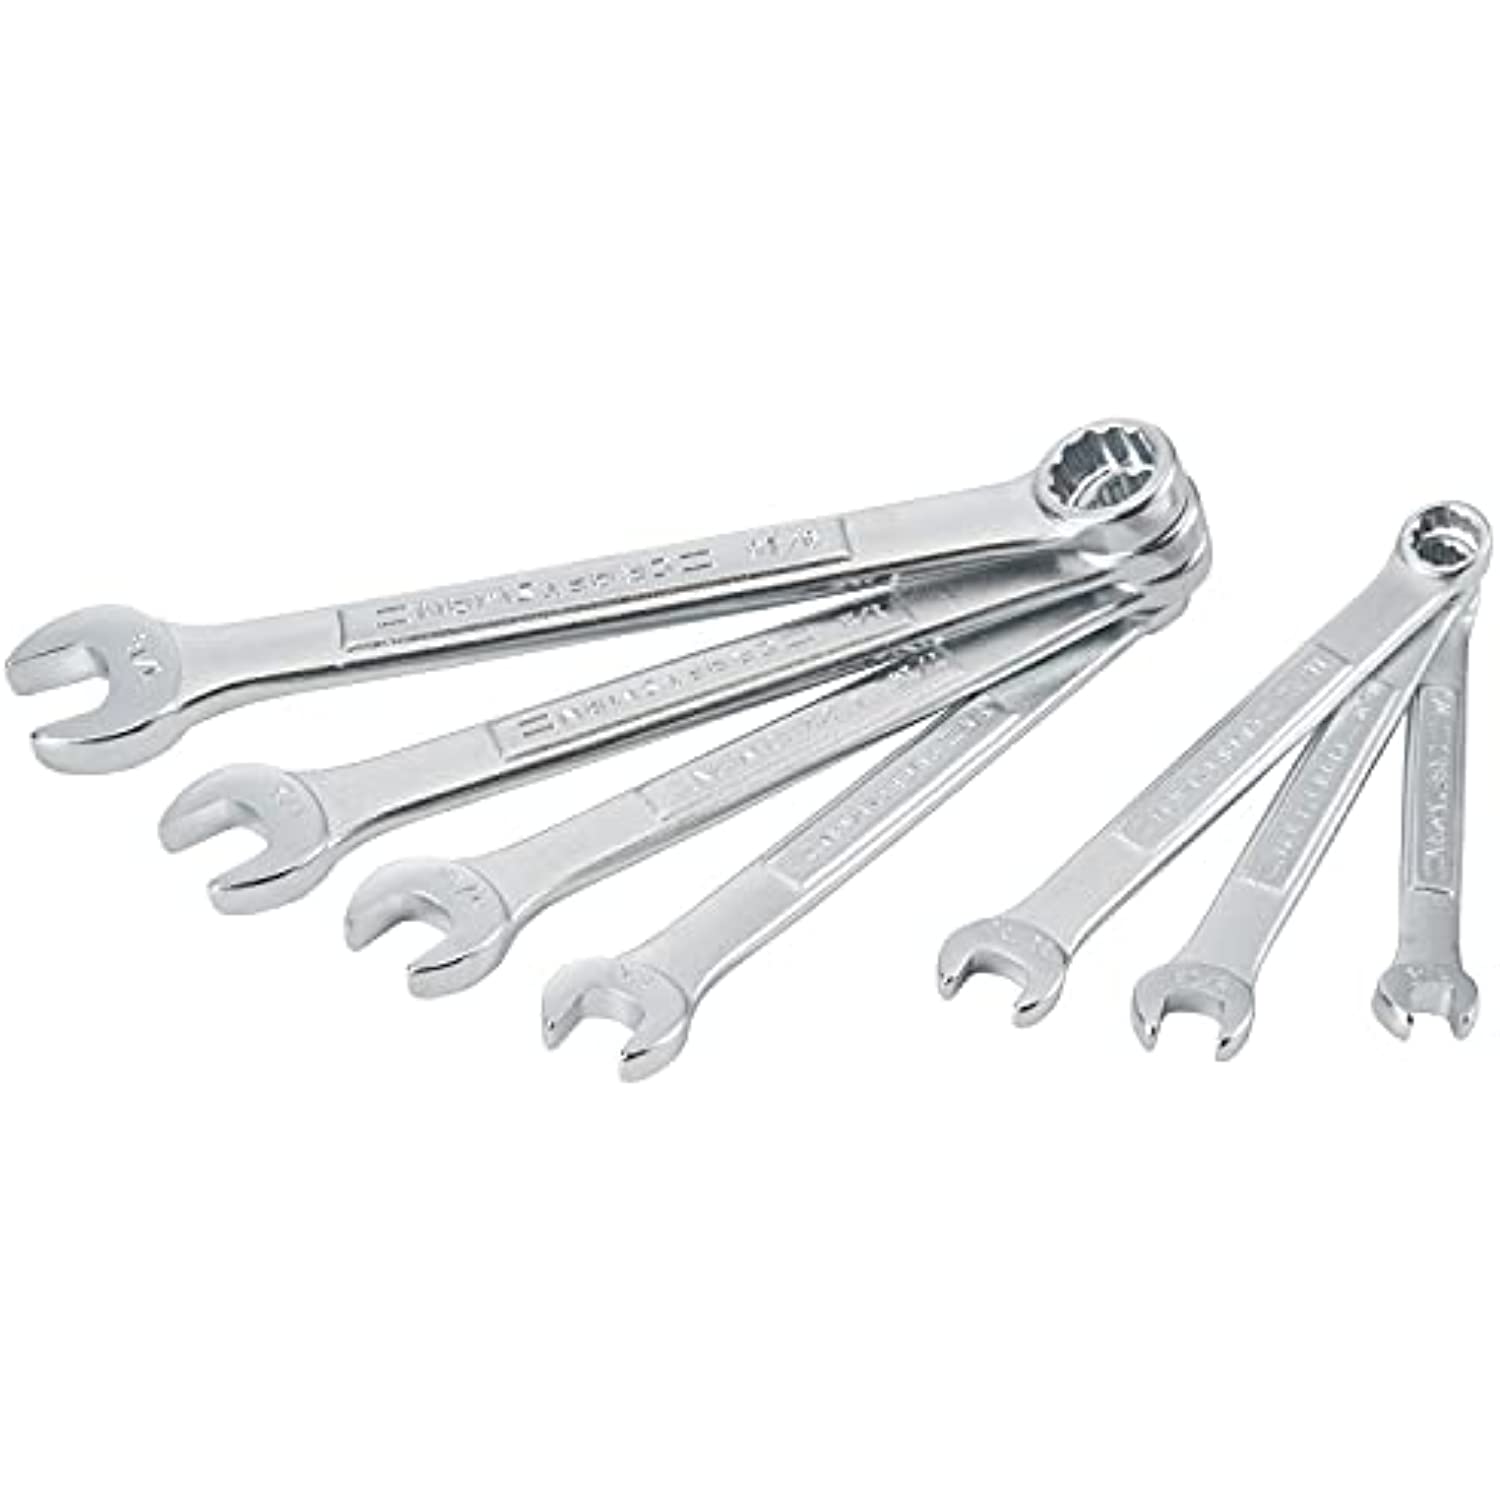 CRAFTSMAN SAE WRENCH SET IN POUCH, 7PC (CMMT21085) - Walmart.com